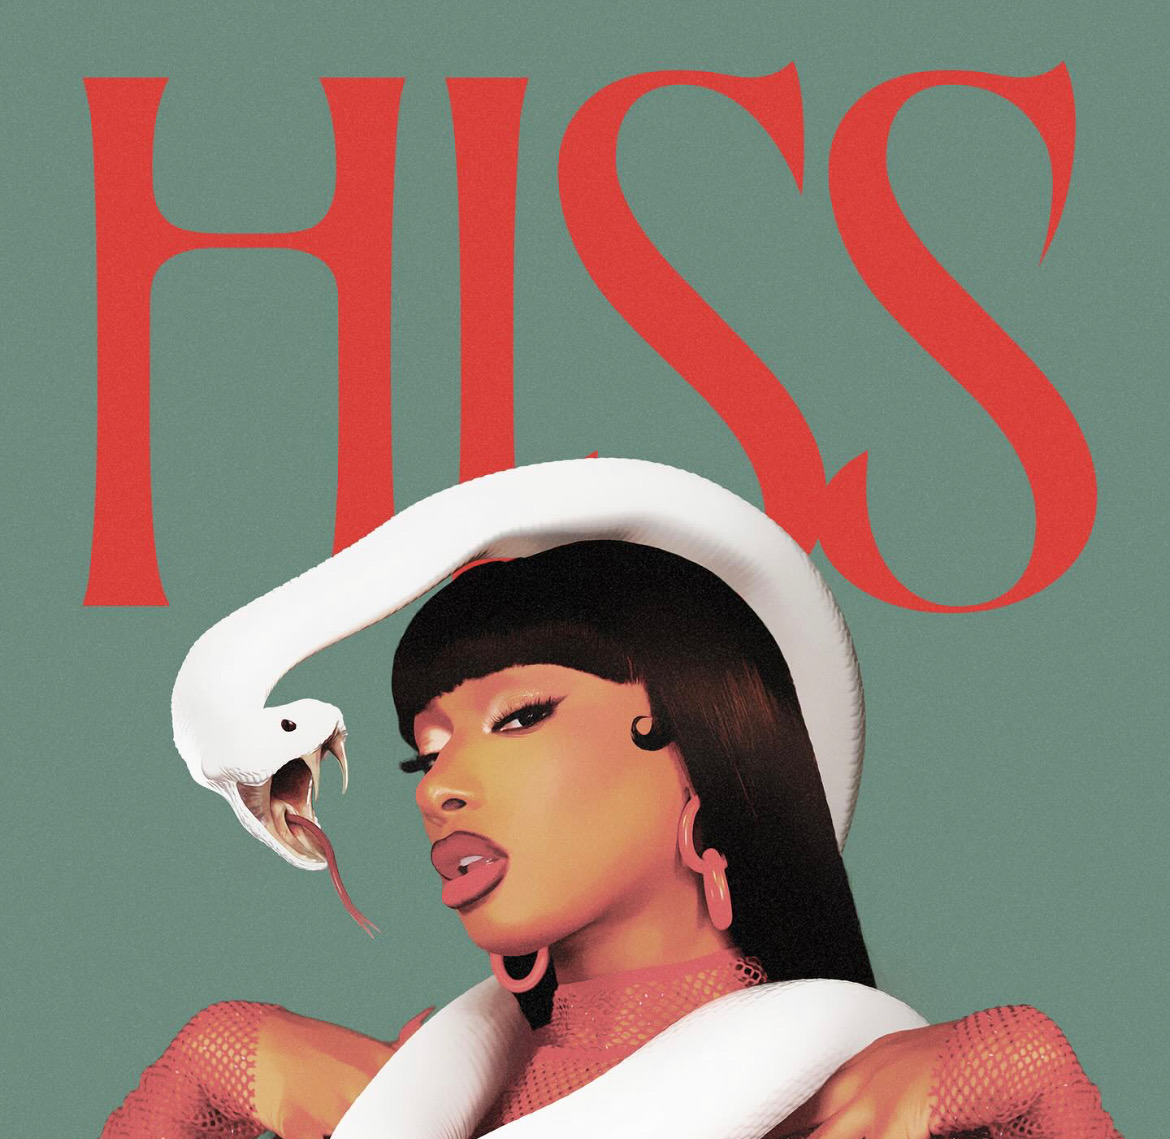 Megan Thee Stallion's 'Hiss' STORMS to #1 on Apple Music, Debuts Top 10 on  Spotify - That Grape Juice